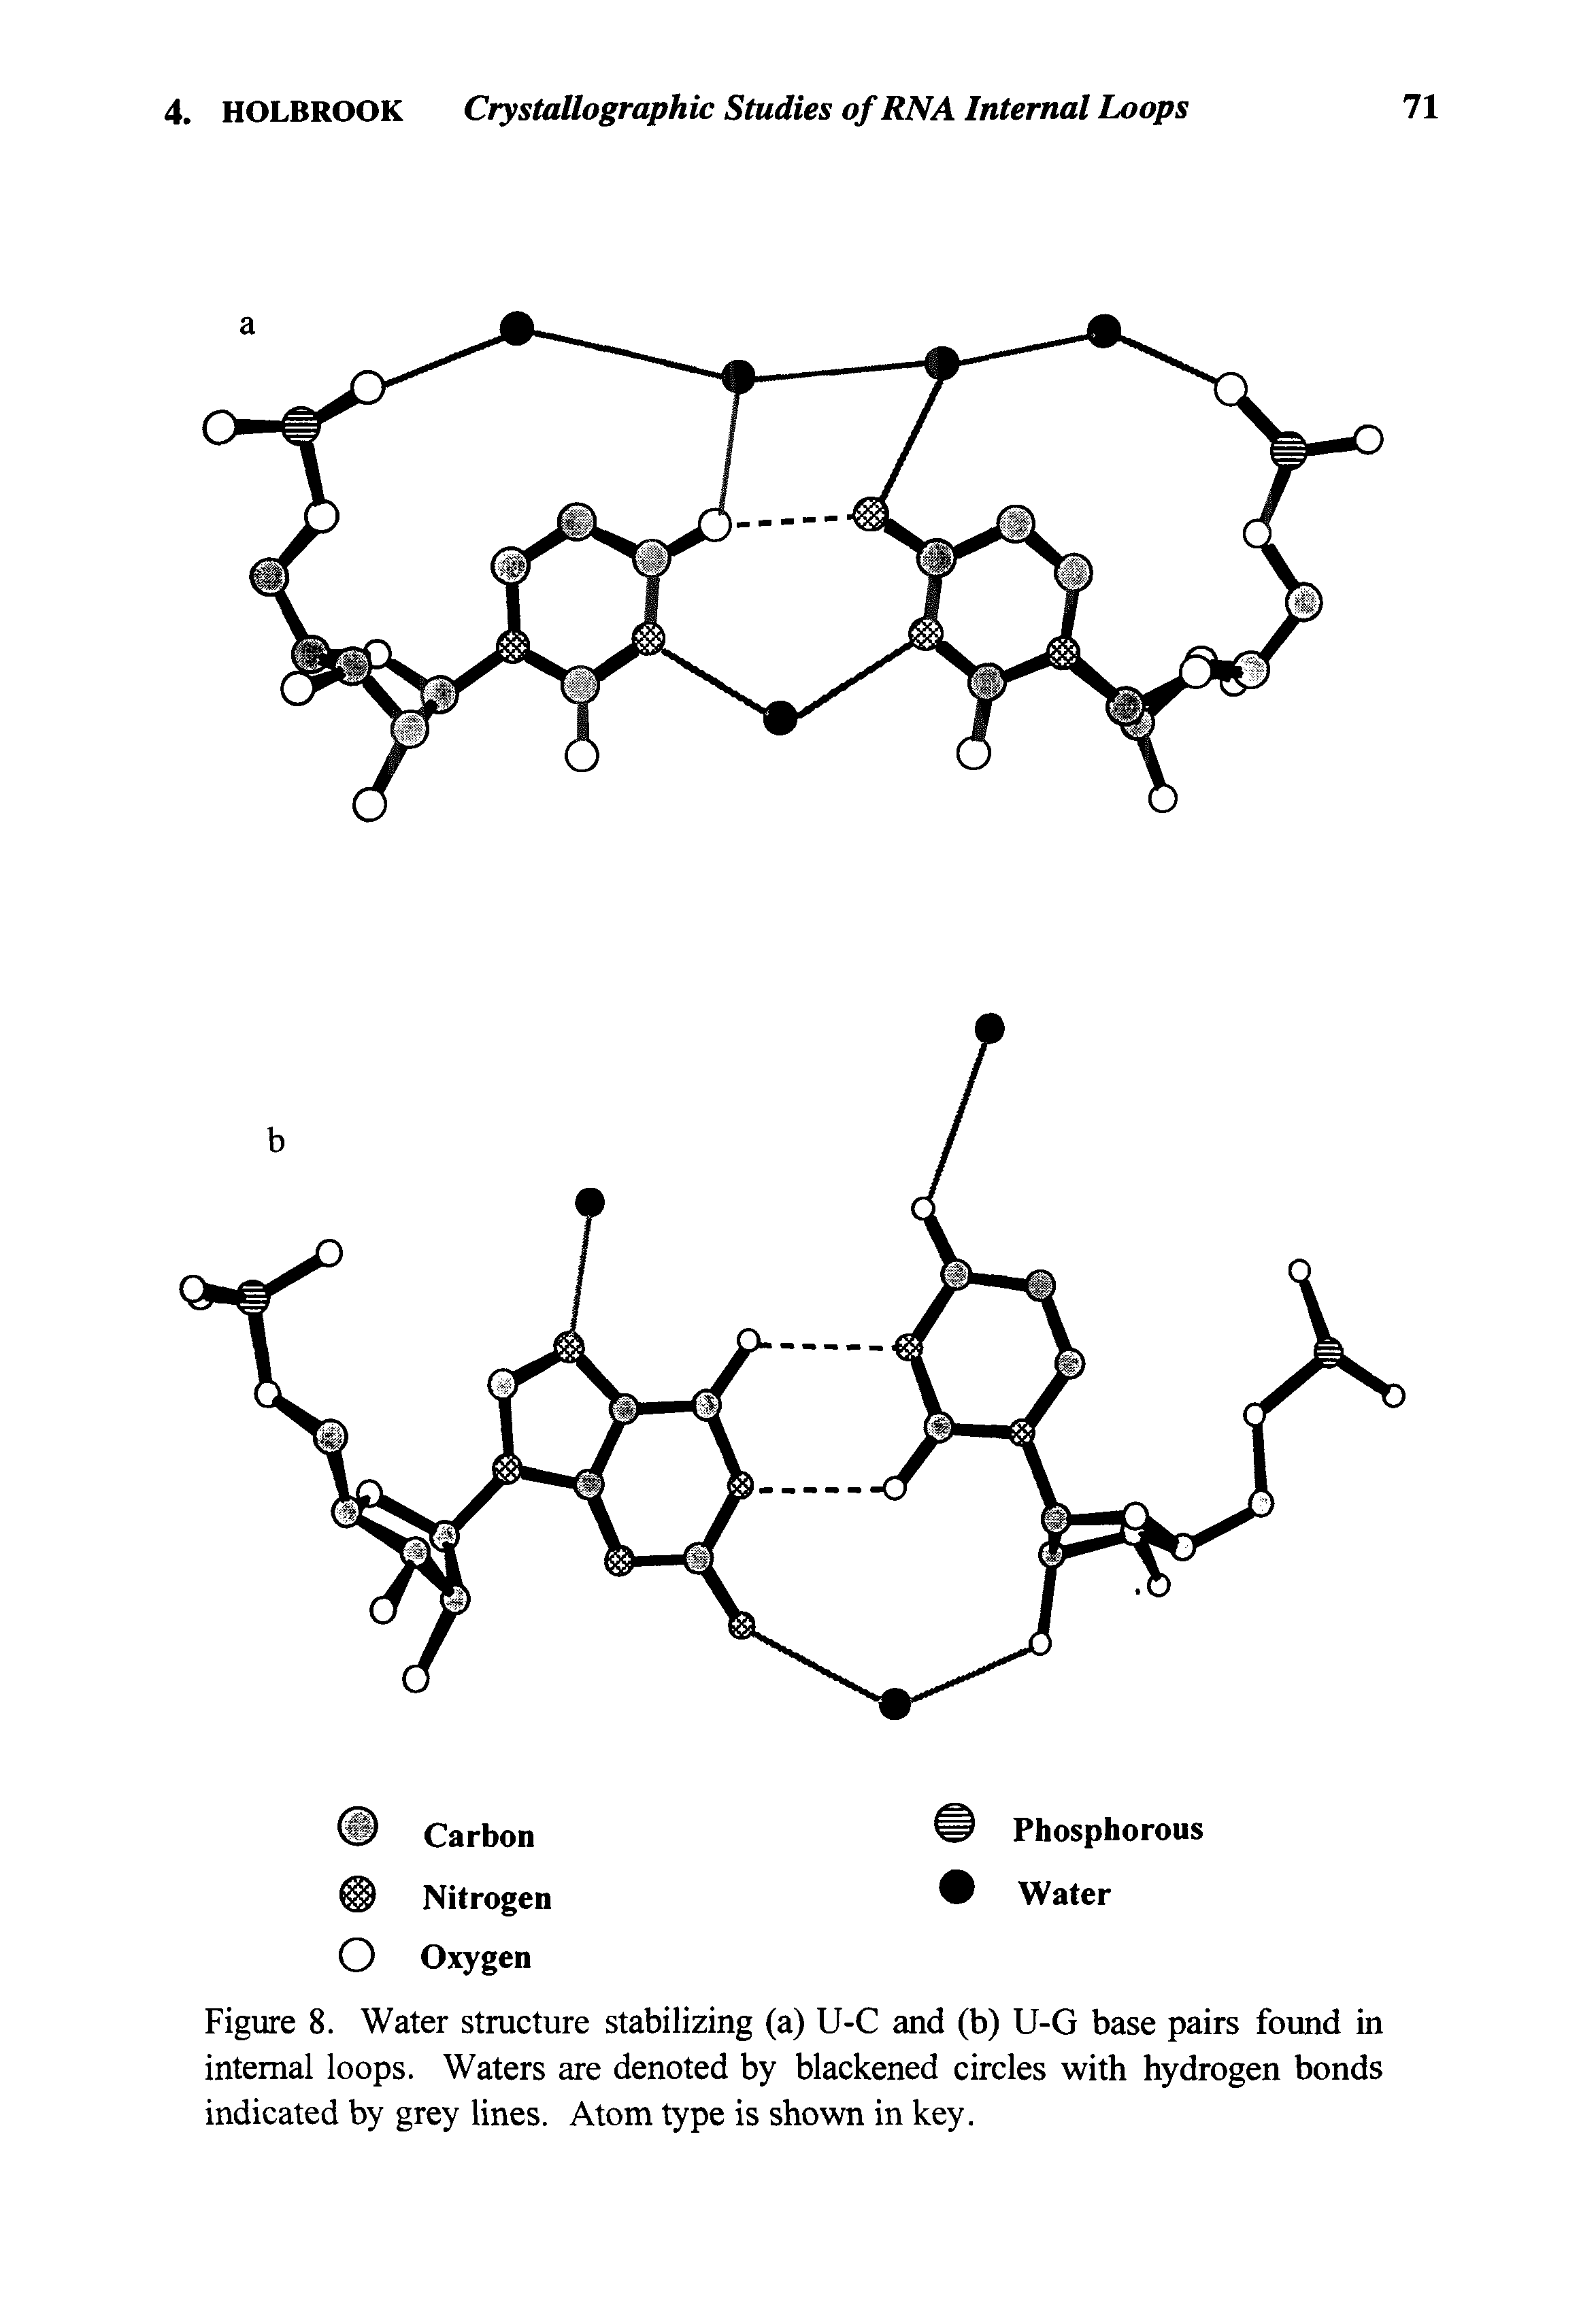 Figure 8. Water structure stabilizing (a) U-C and (b) U-G base pairs found in internal loops. Waters are denoted by blackened circles with hydrogen bonds indicated by grey lines. Atom type is shown in key.